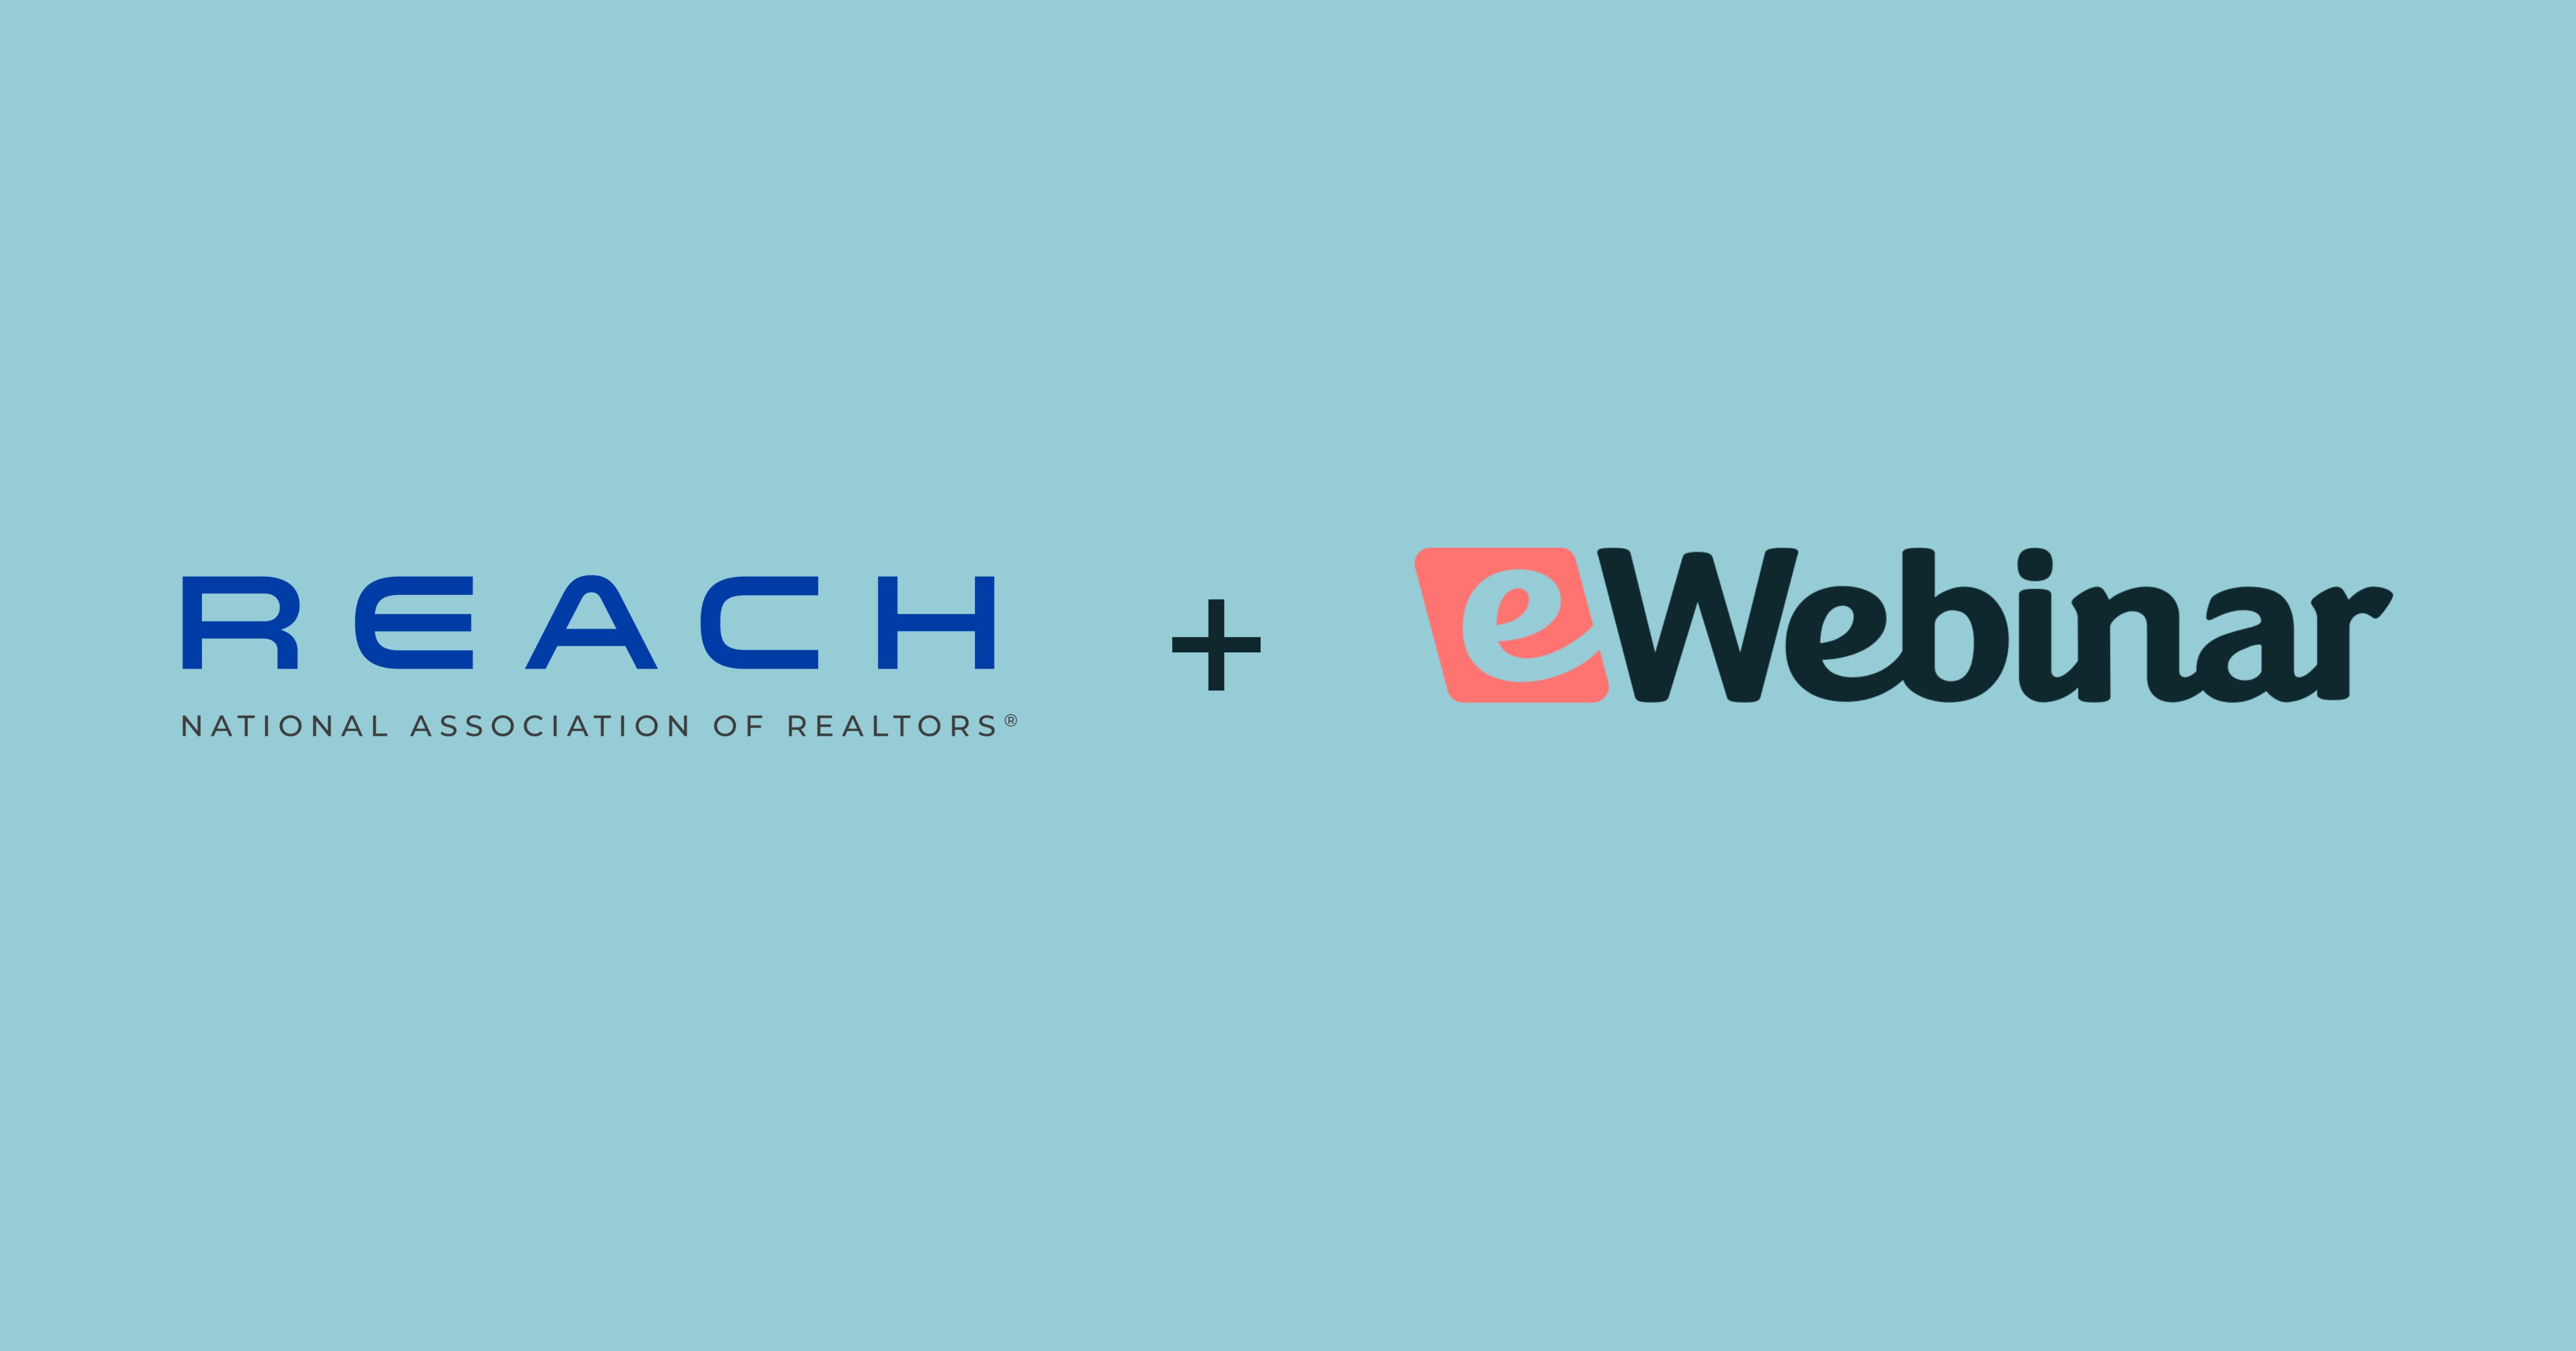 eWebinar Partners with REACH Program to Help Real Estate Tech Startups Scale Agent Onboarding and Training